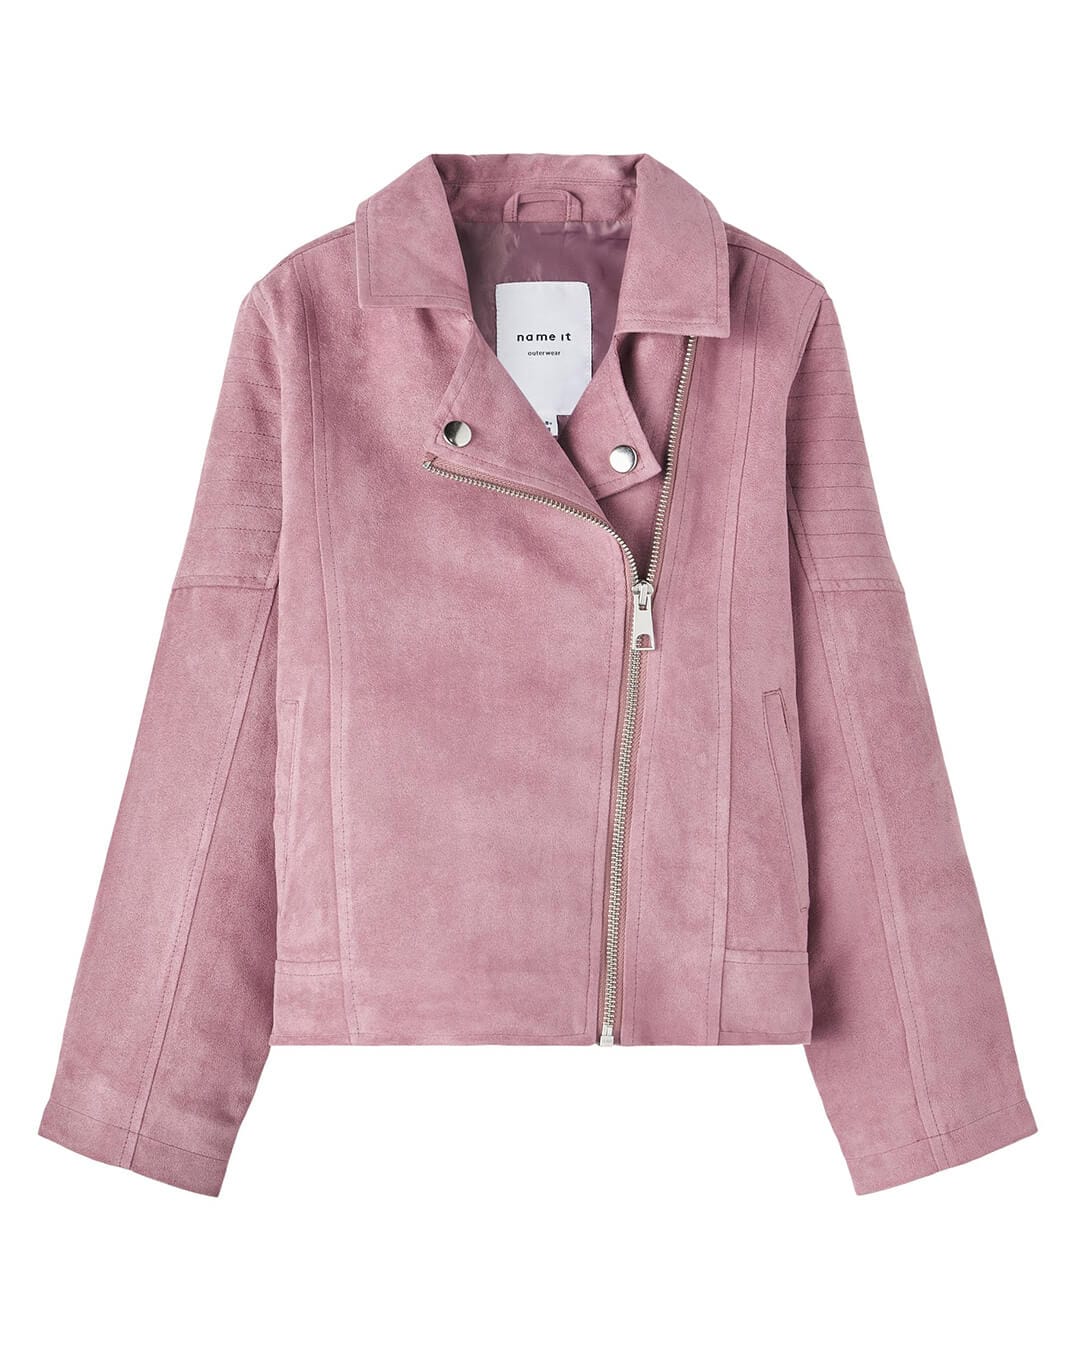 Name It Outerwear Name It Molly Pink Faux Suede Jacket